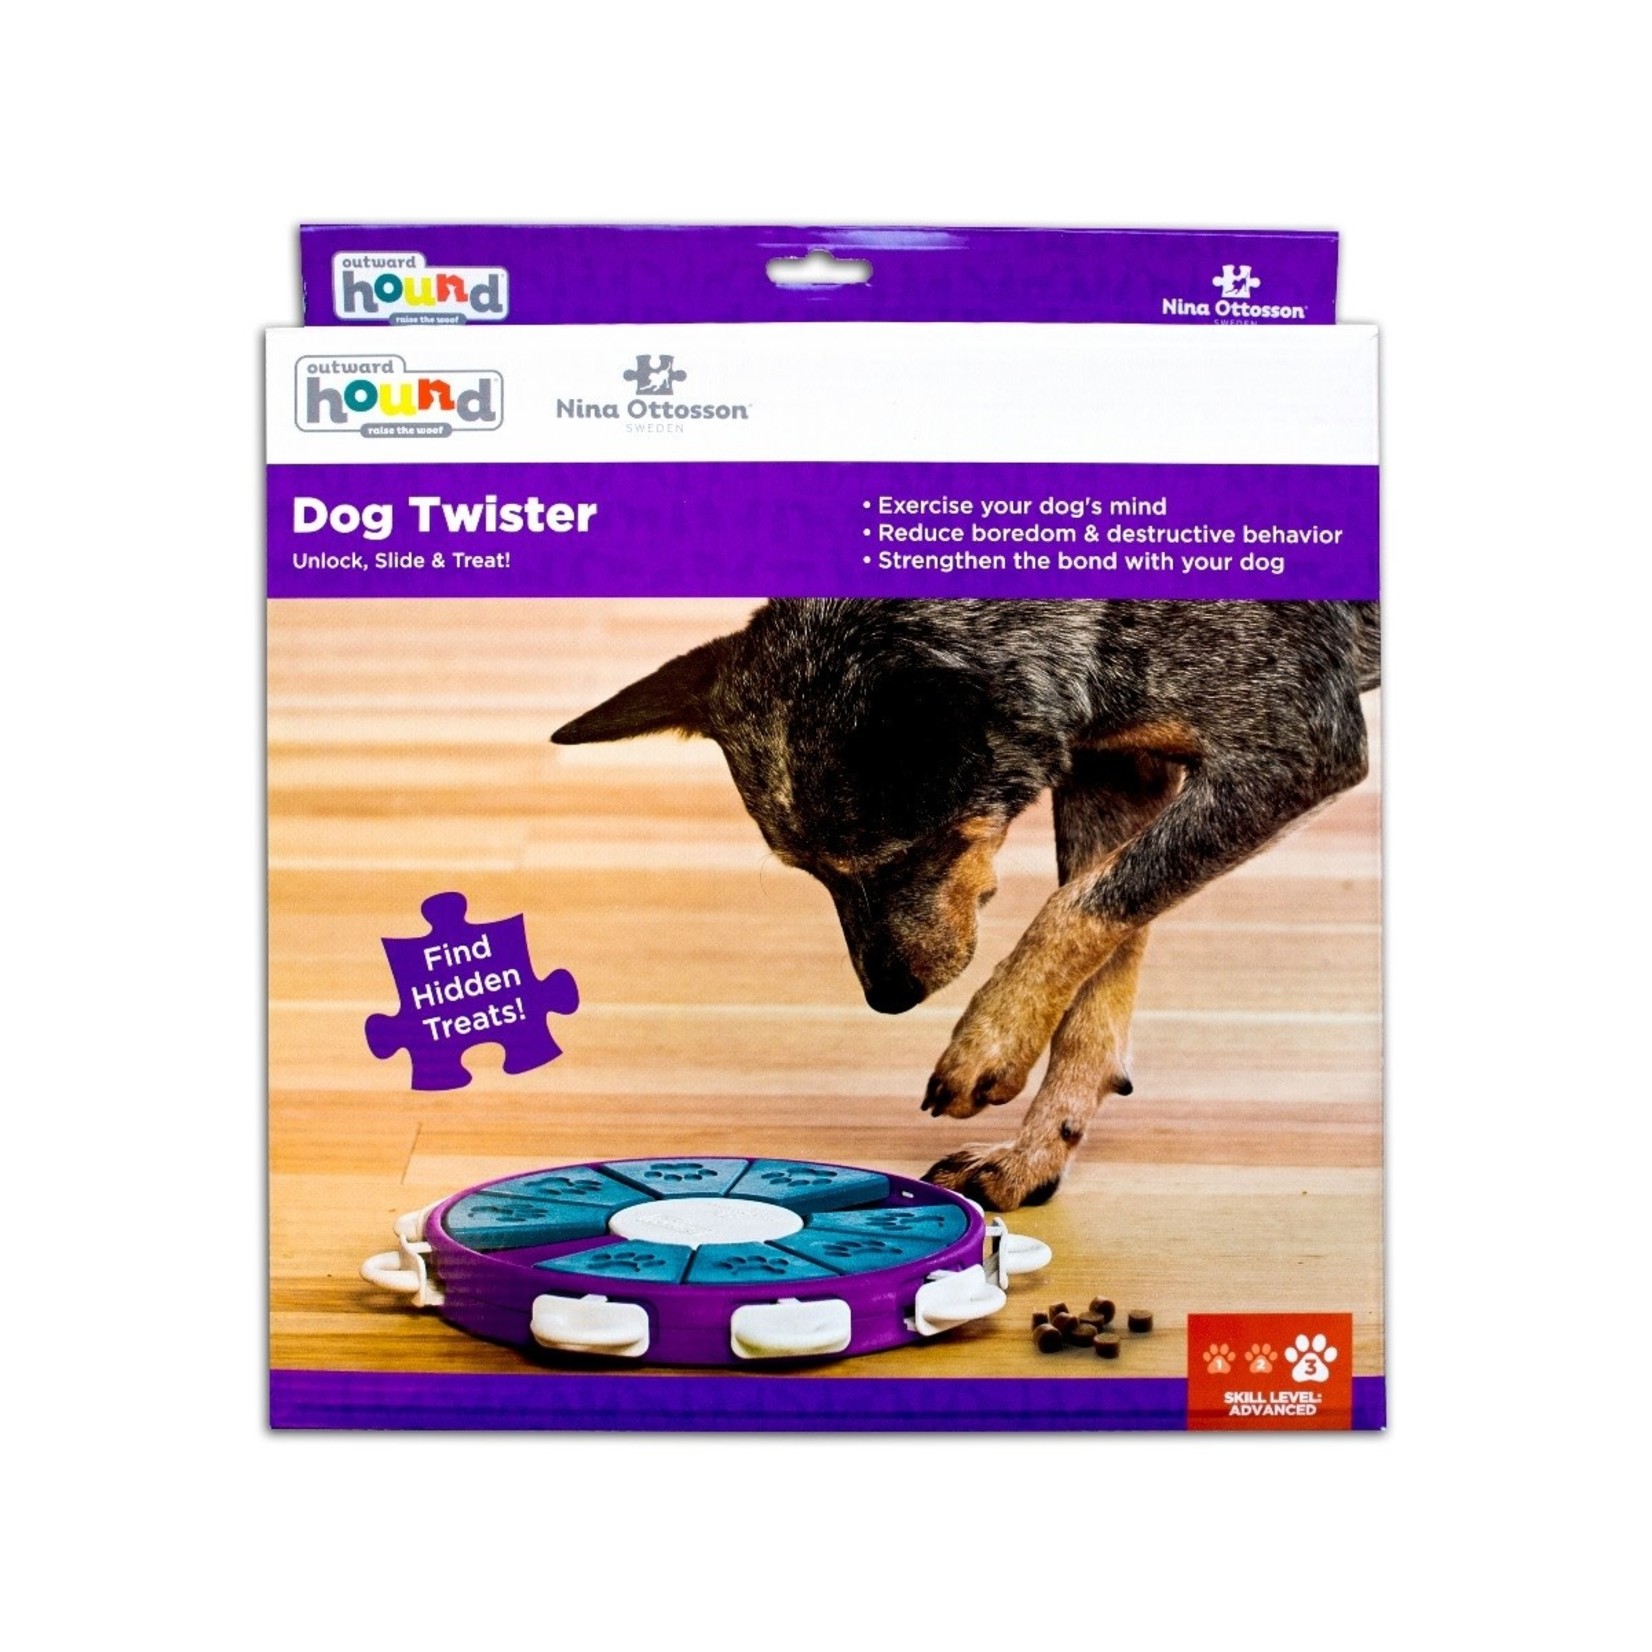 Nina Ottosson by Outward Hound Dog Twister (Level 3) Interactive Puzzle Toy for Dogs